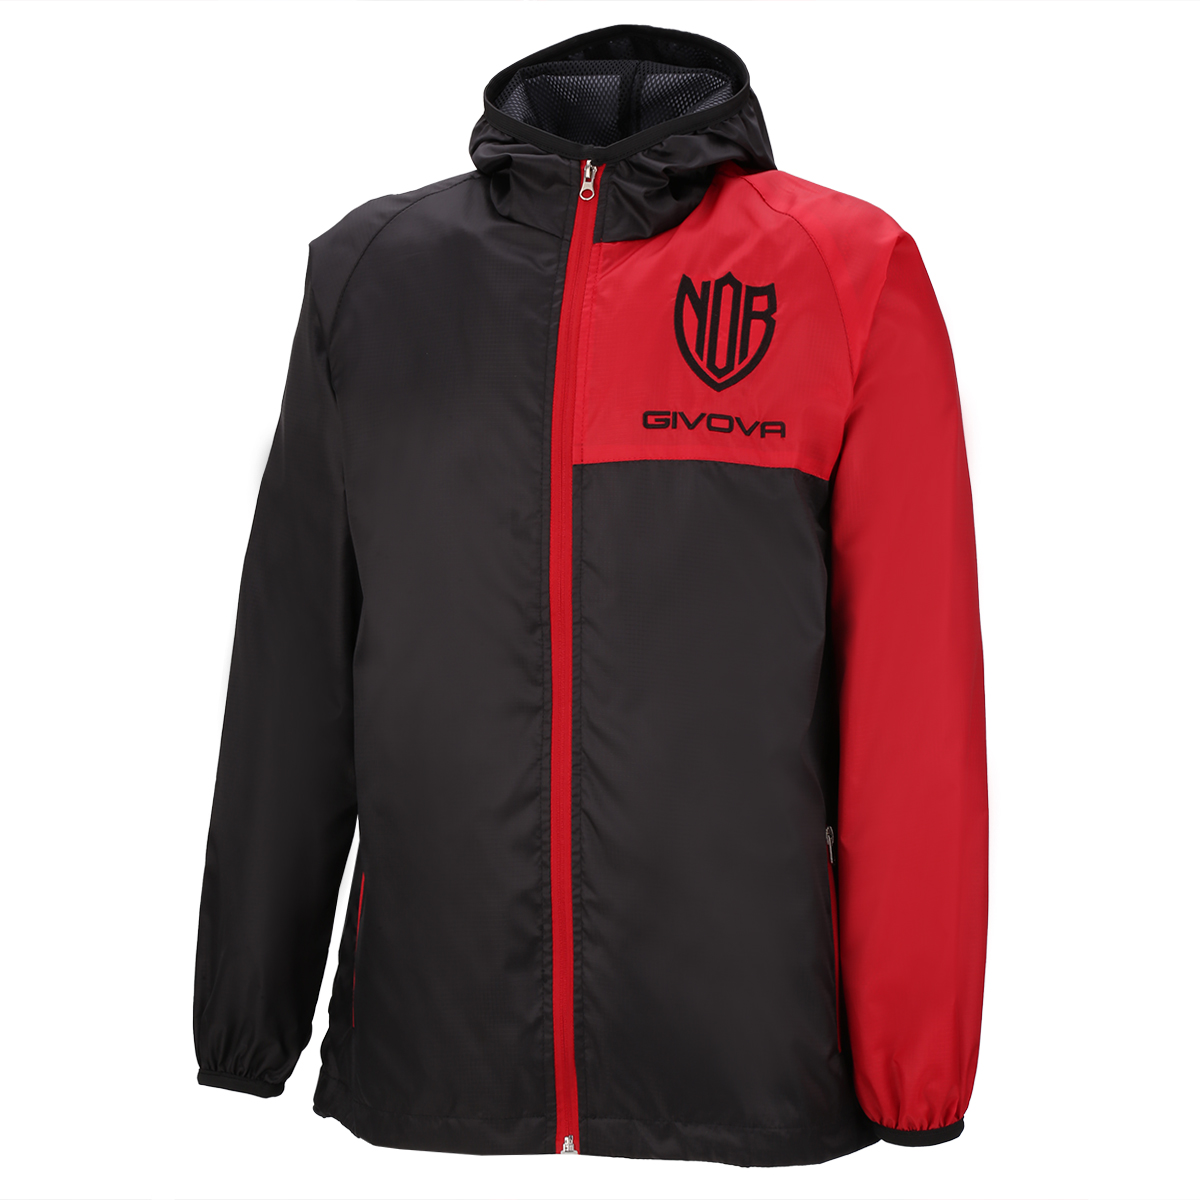 Campera Givova Newell's Old Boys,  image number null